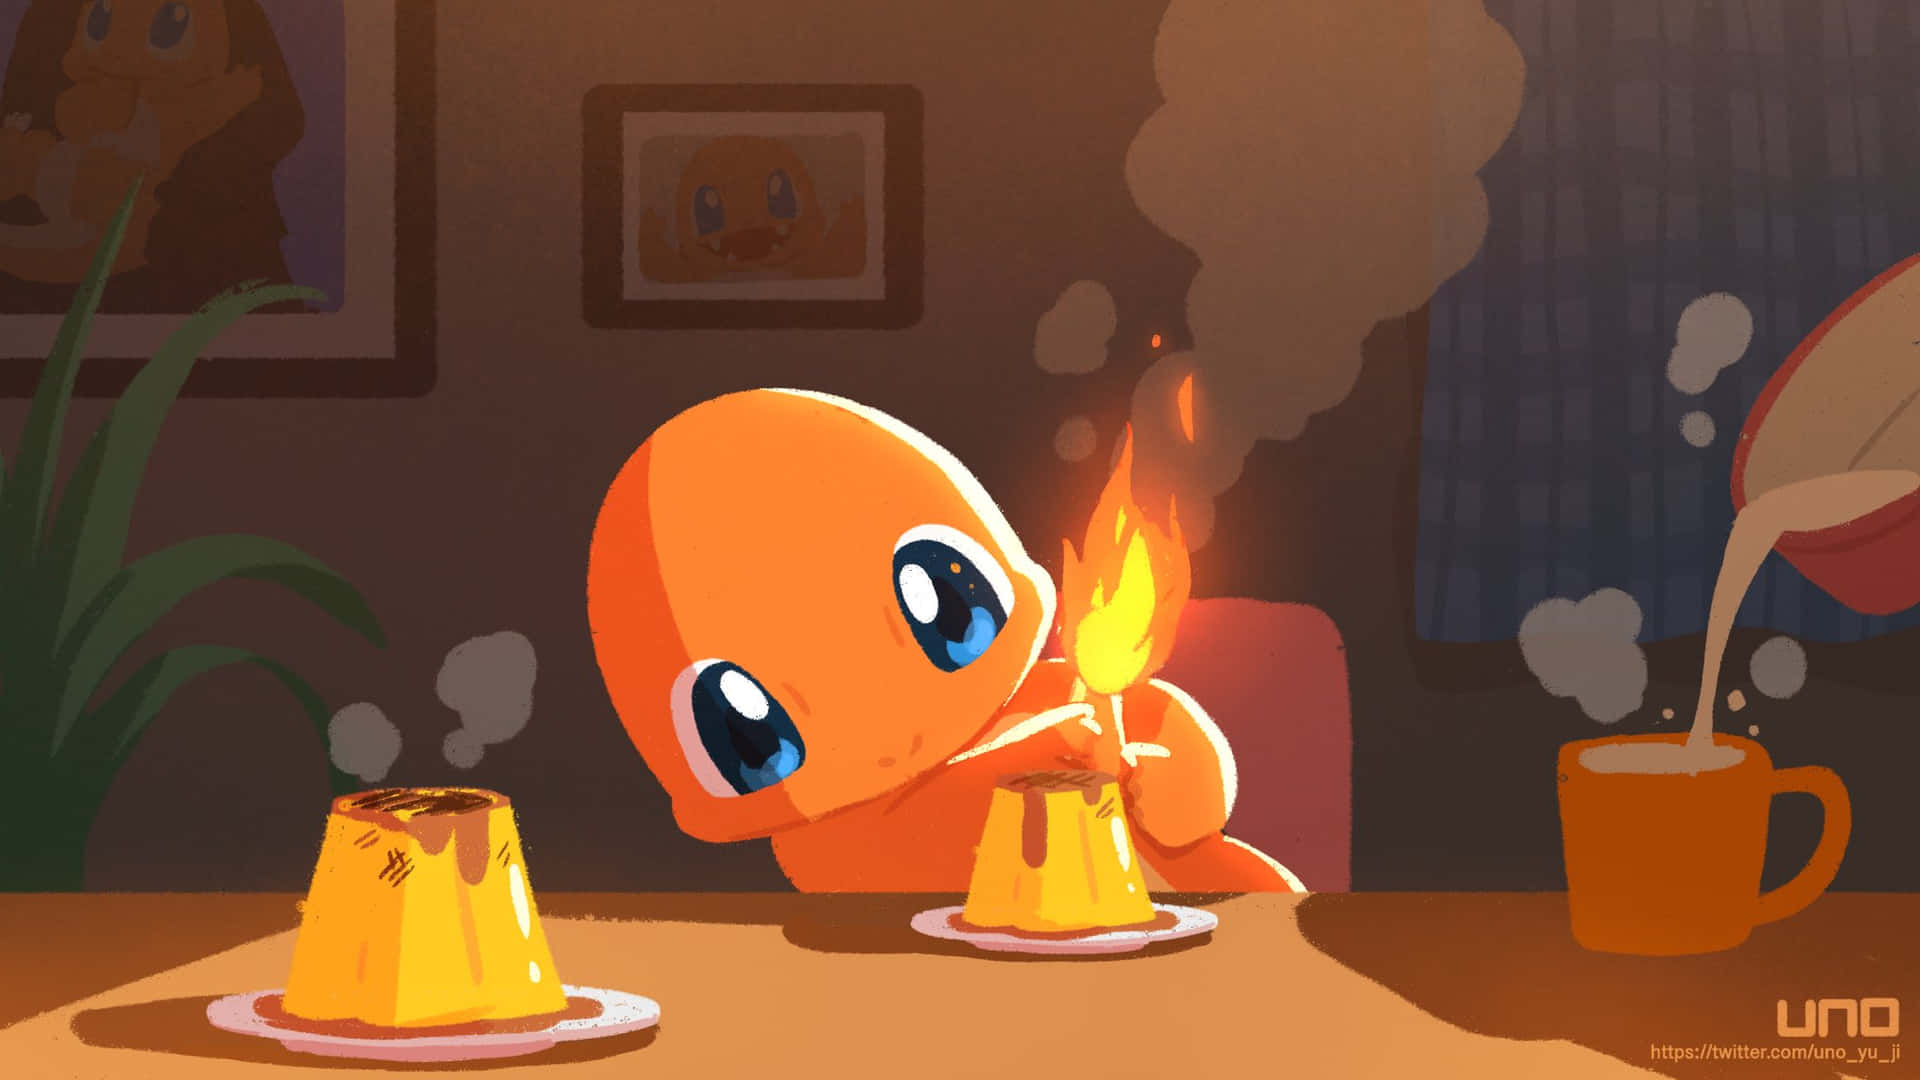 Awaken the nature of your inner trainer with the cute Charmander! Wallpaper